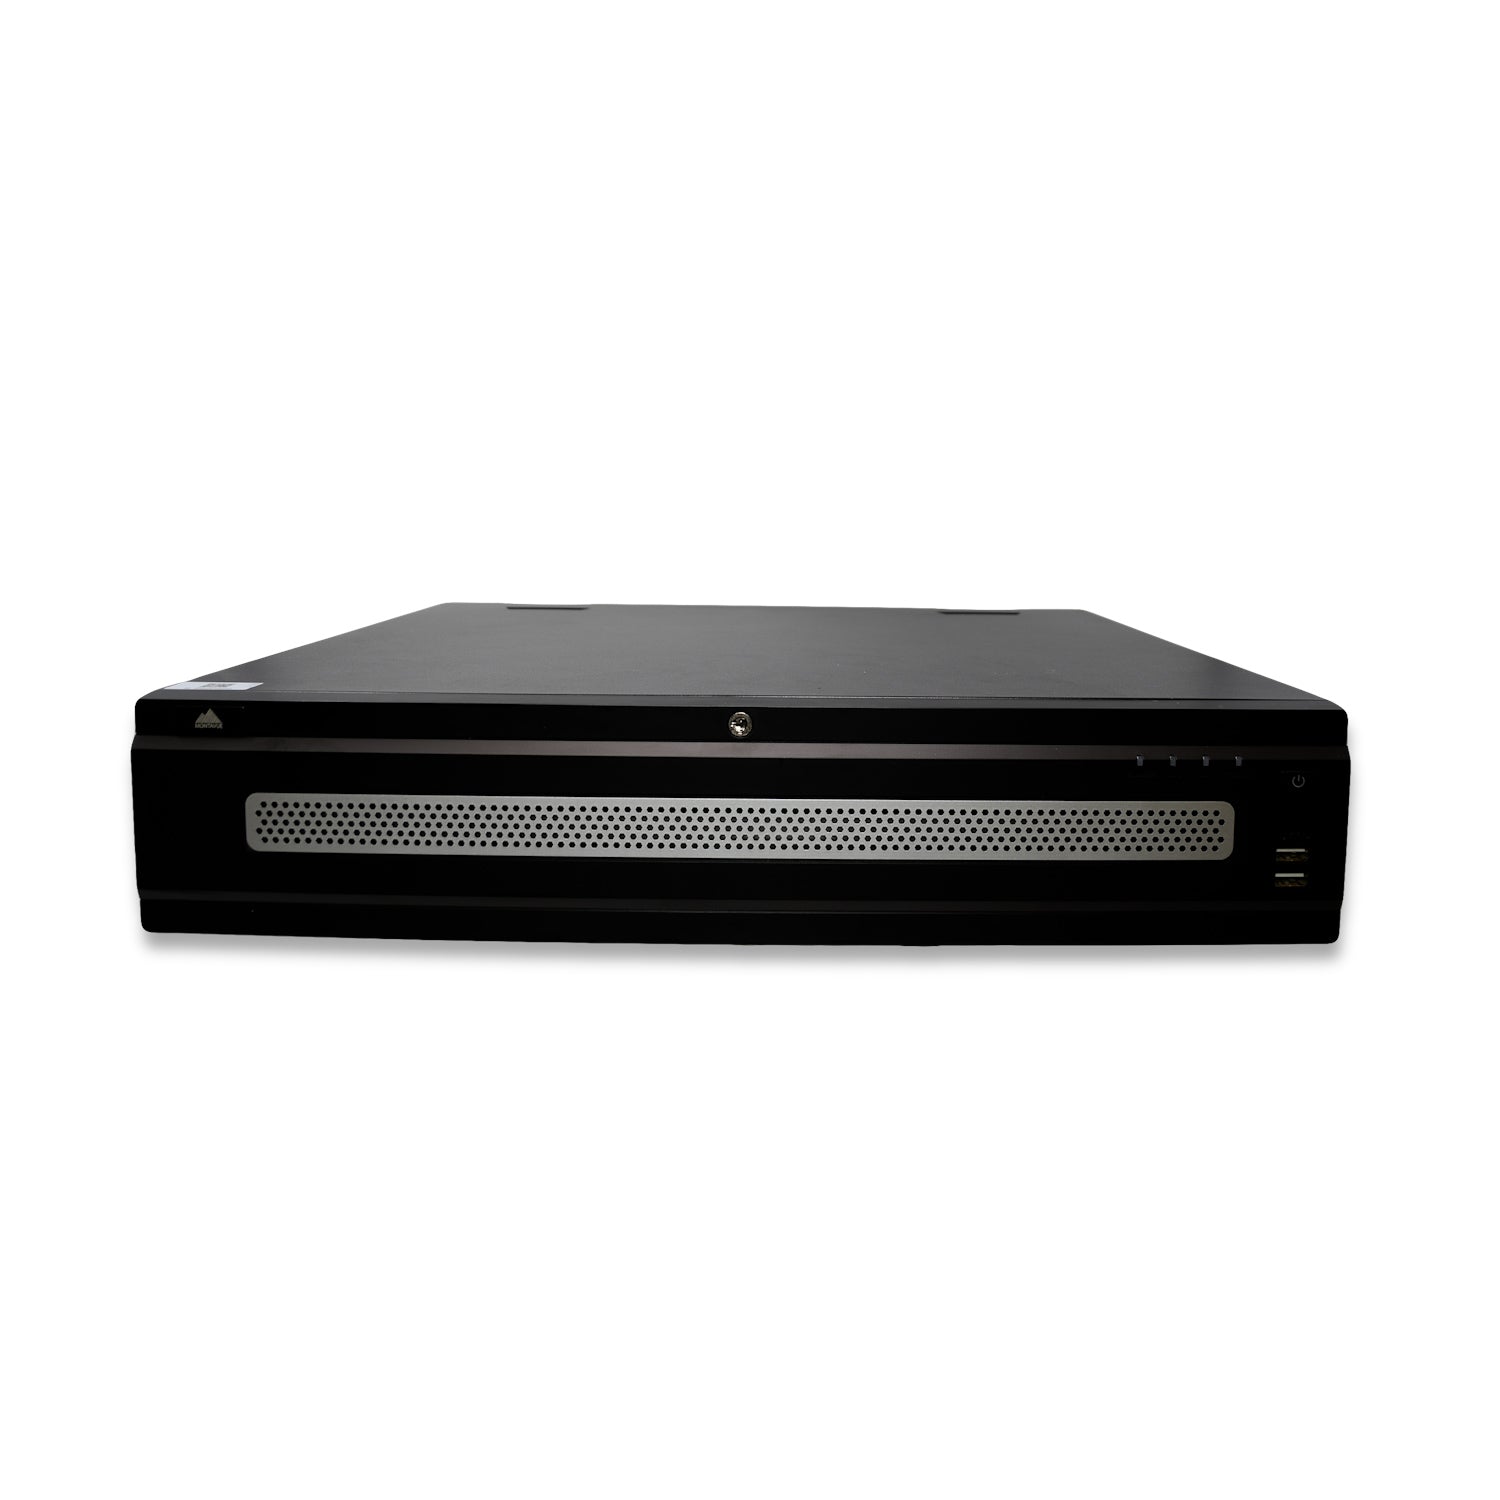 MNR68064-AI | 64 Channel 4K H.265+ Ultra-AI NVR with 160TB (8x20TB) HDD Max Internal Capacity, eSATA Expandable - HDDs Not Included - Montavue